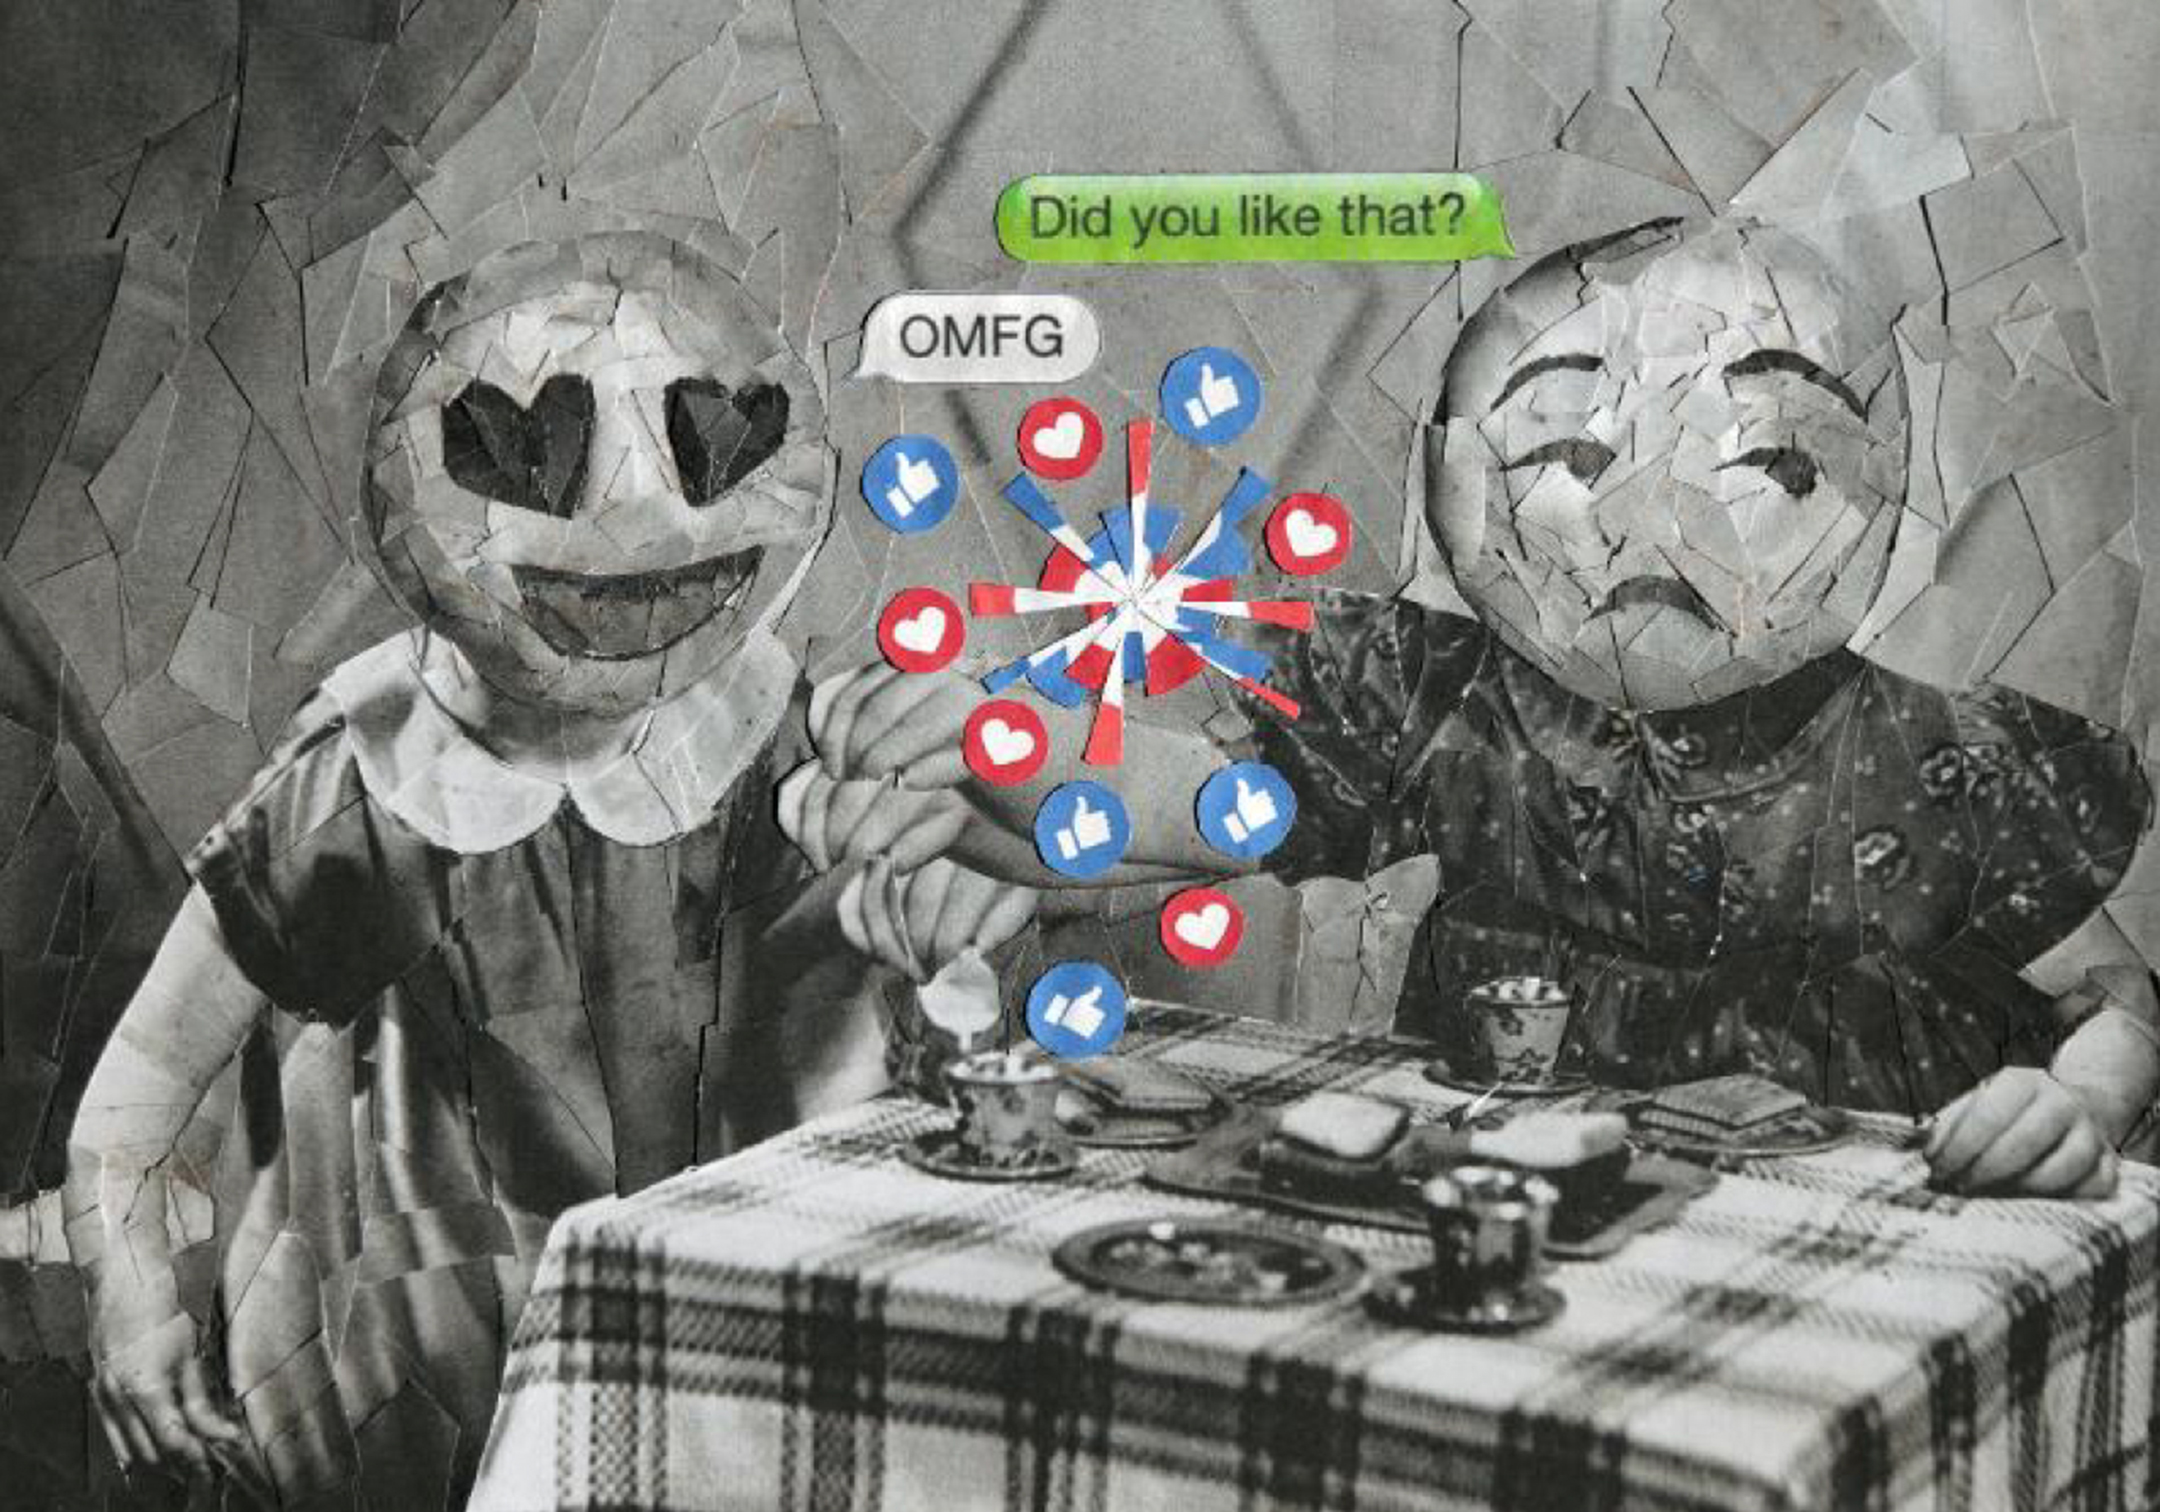 Black and white collage of two people sitting at a dining table, the one on the left has heart eye emoji face and says OMFG the one on the right has a side-eye emoji face and says Did you like that? With red hearts and blue and white thumbs up icons in the center